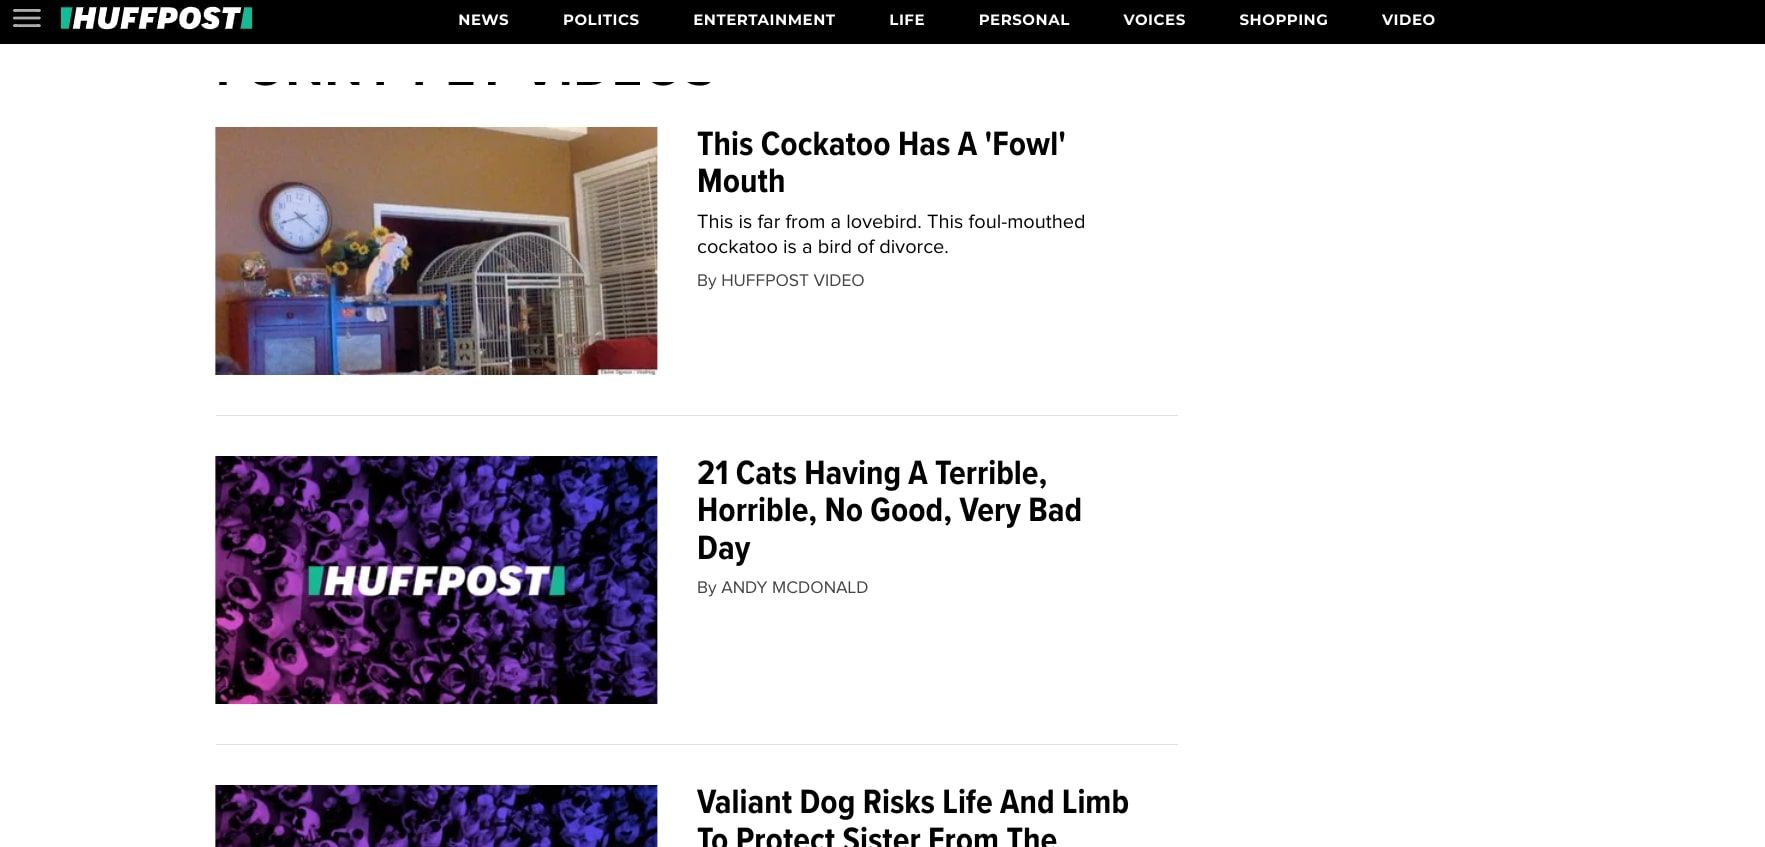 screenshot from huffpost's animal videos section